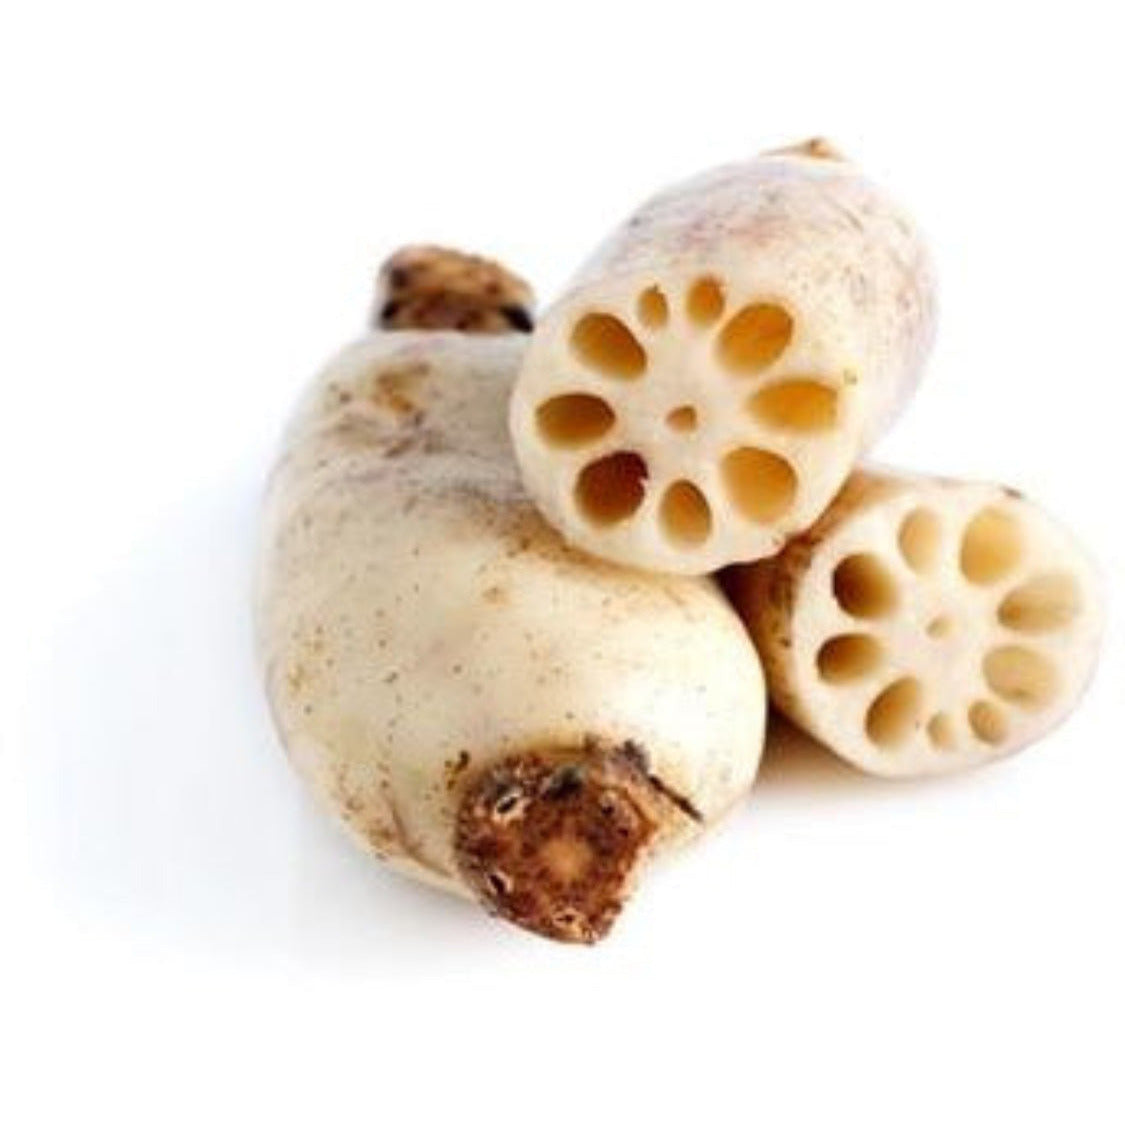 lotus root [about 1.5-1.8 lbs]